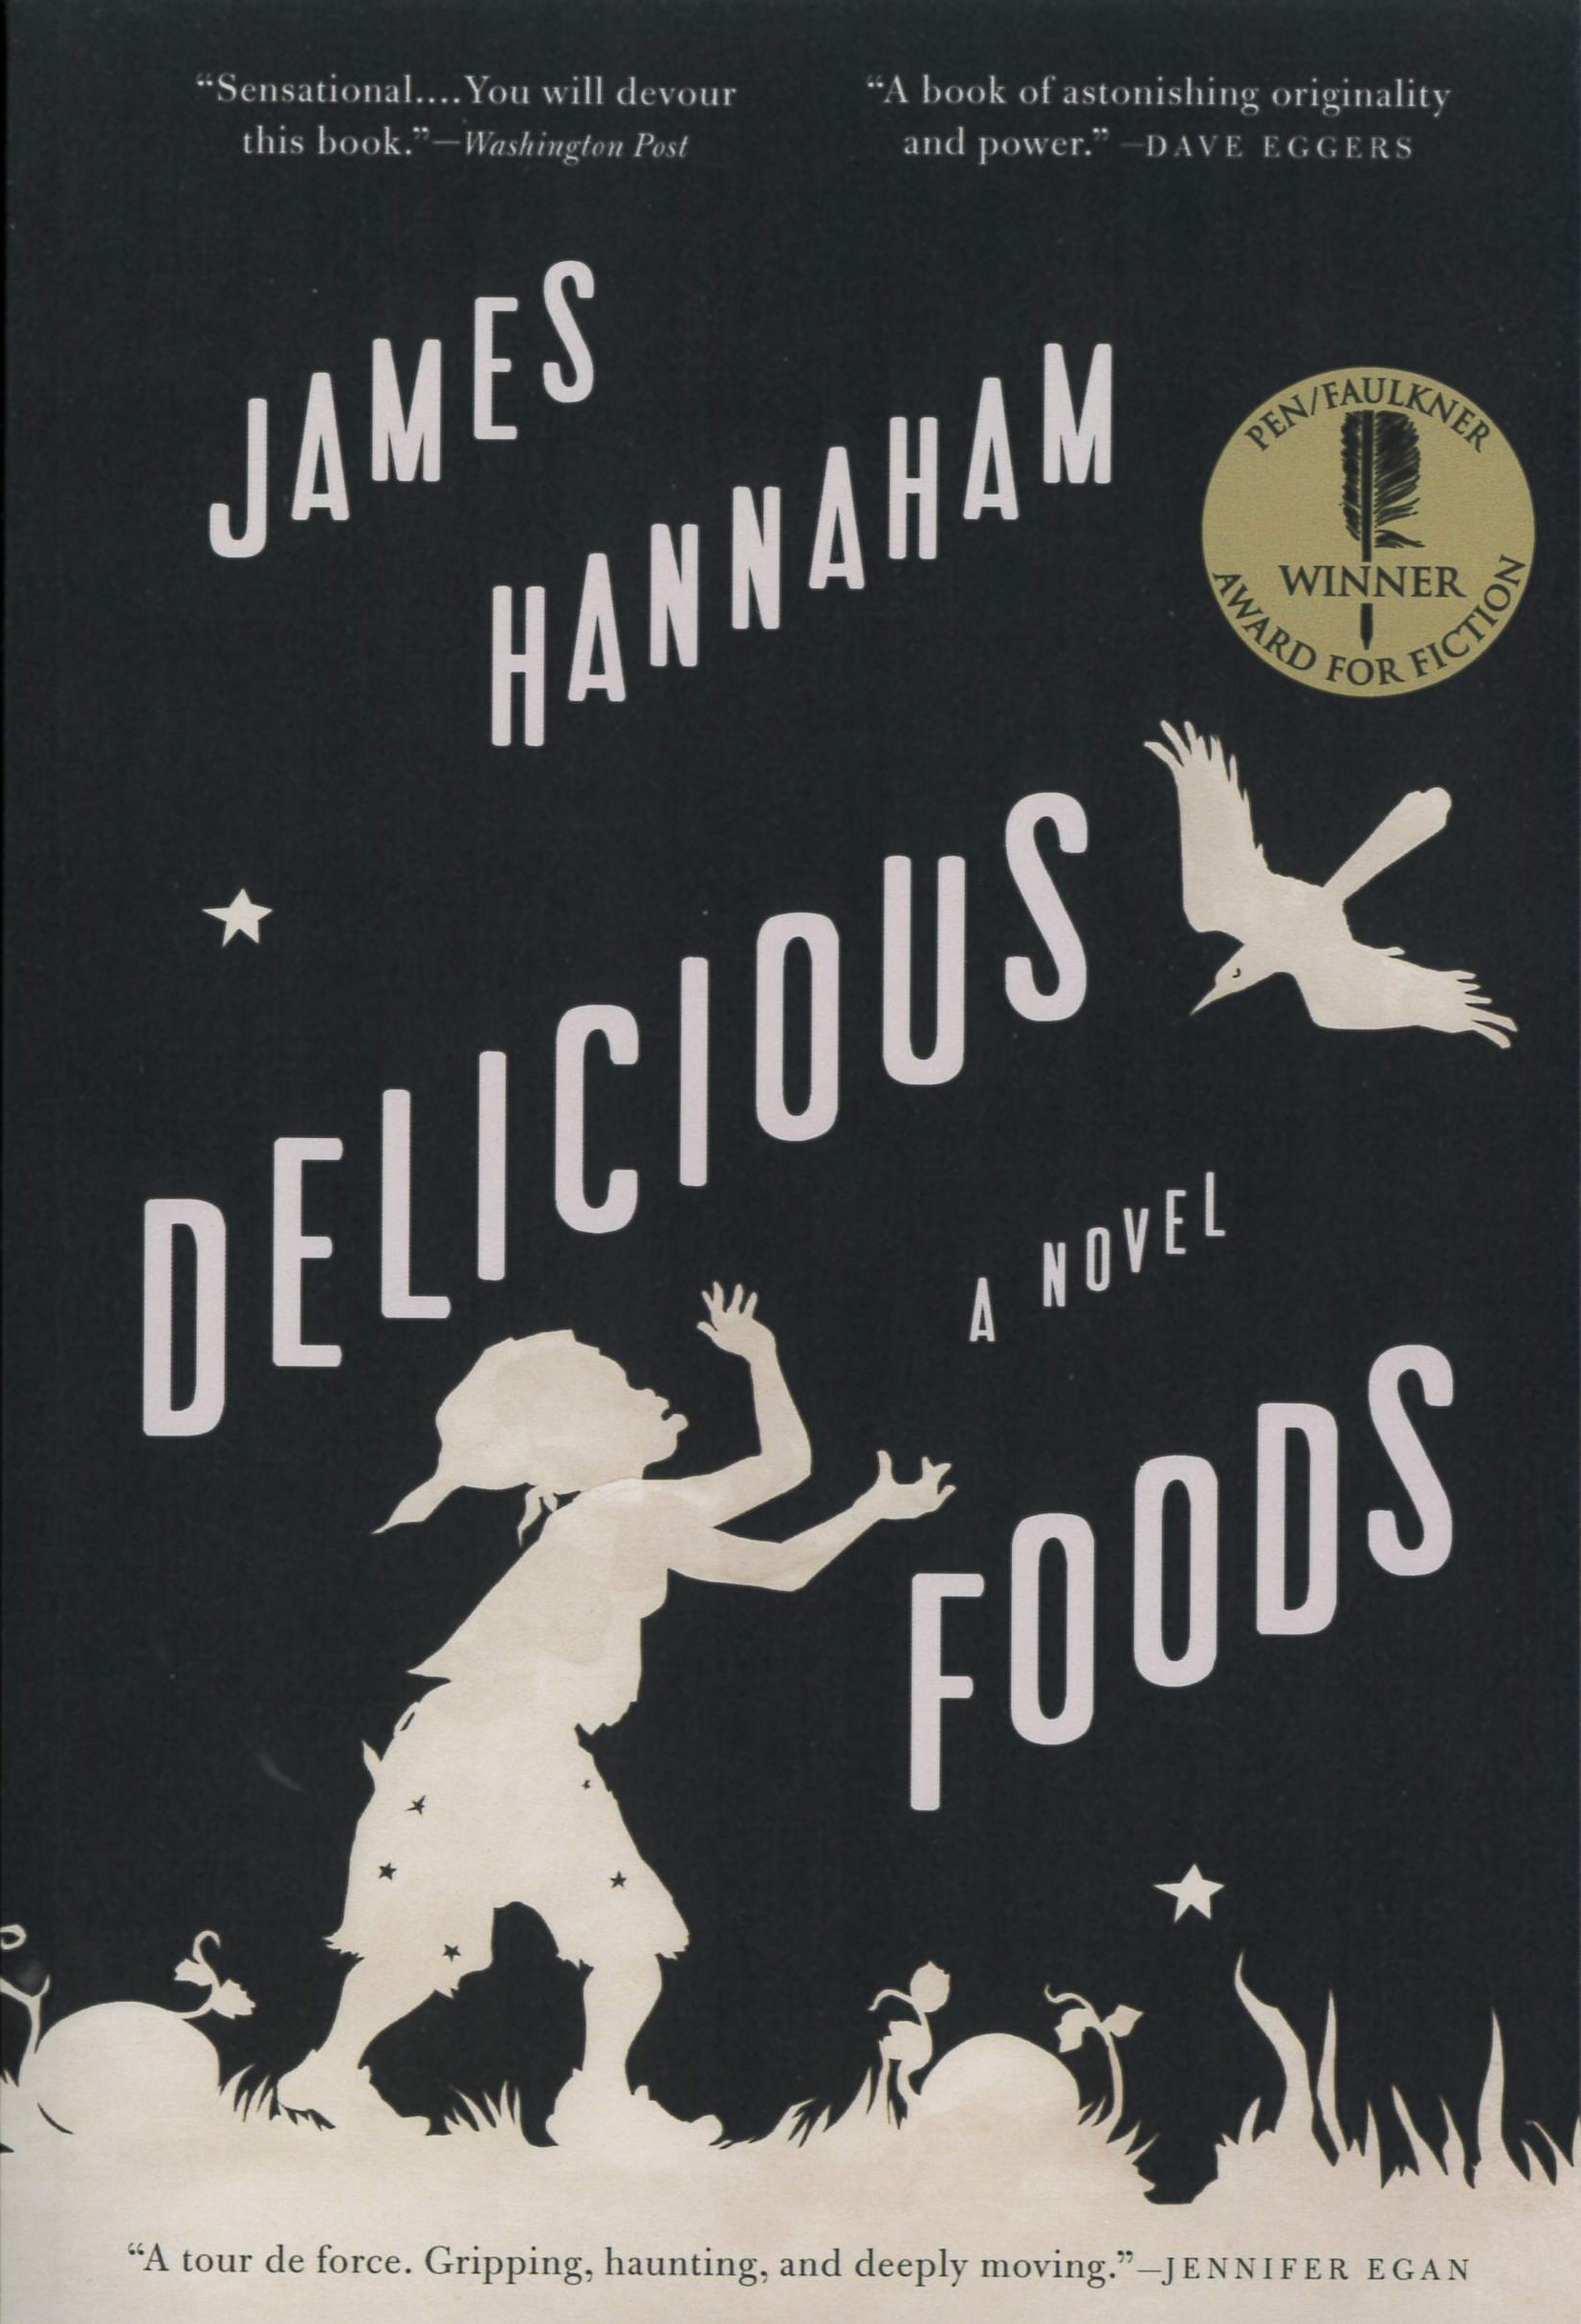 Delicious foods : a novel /